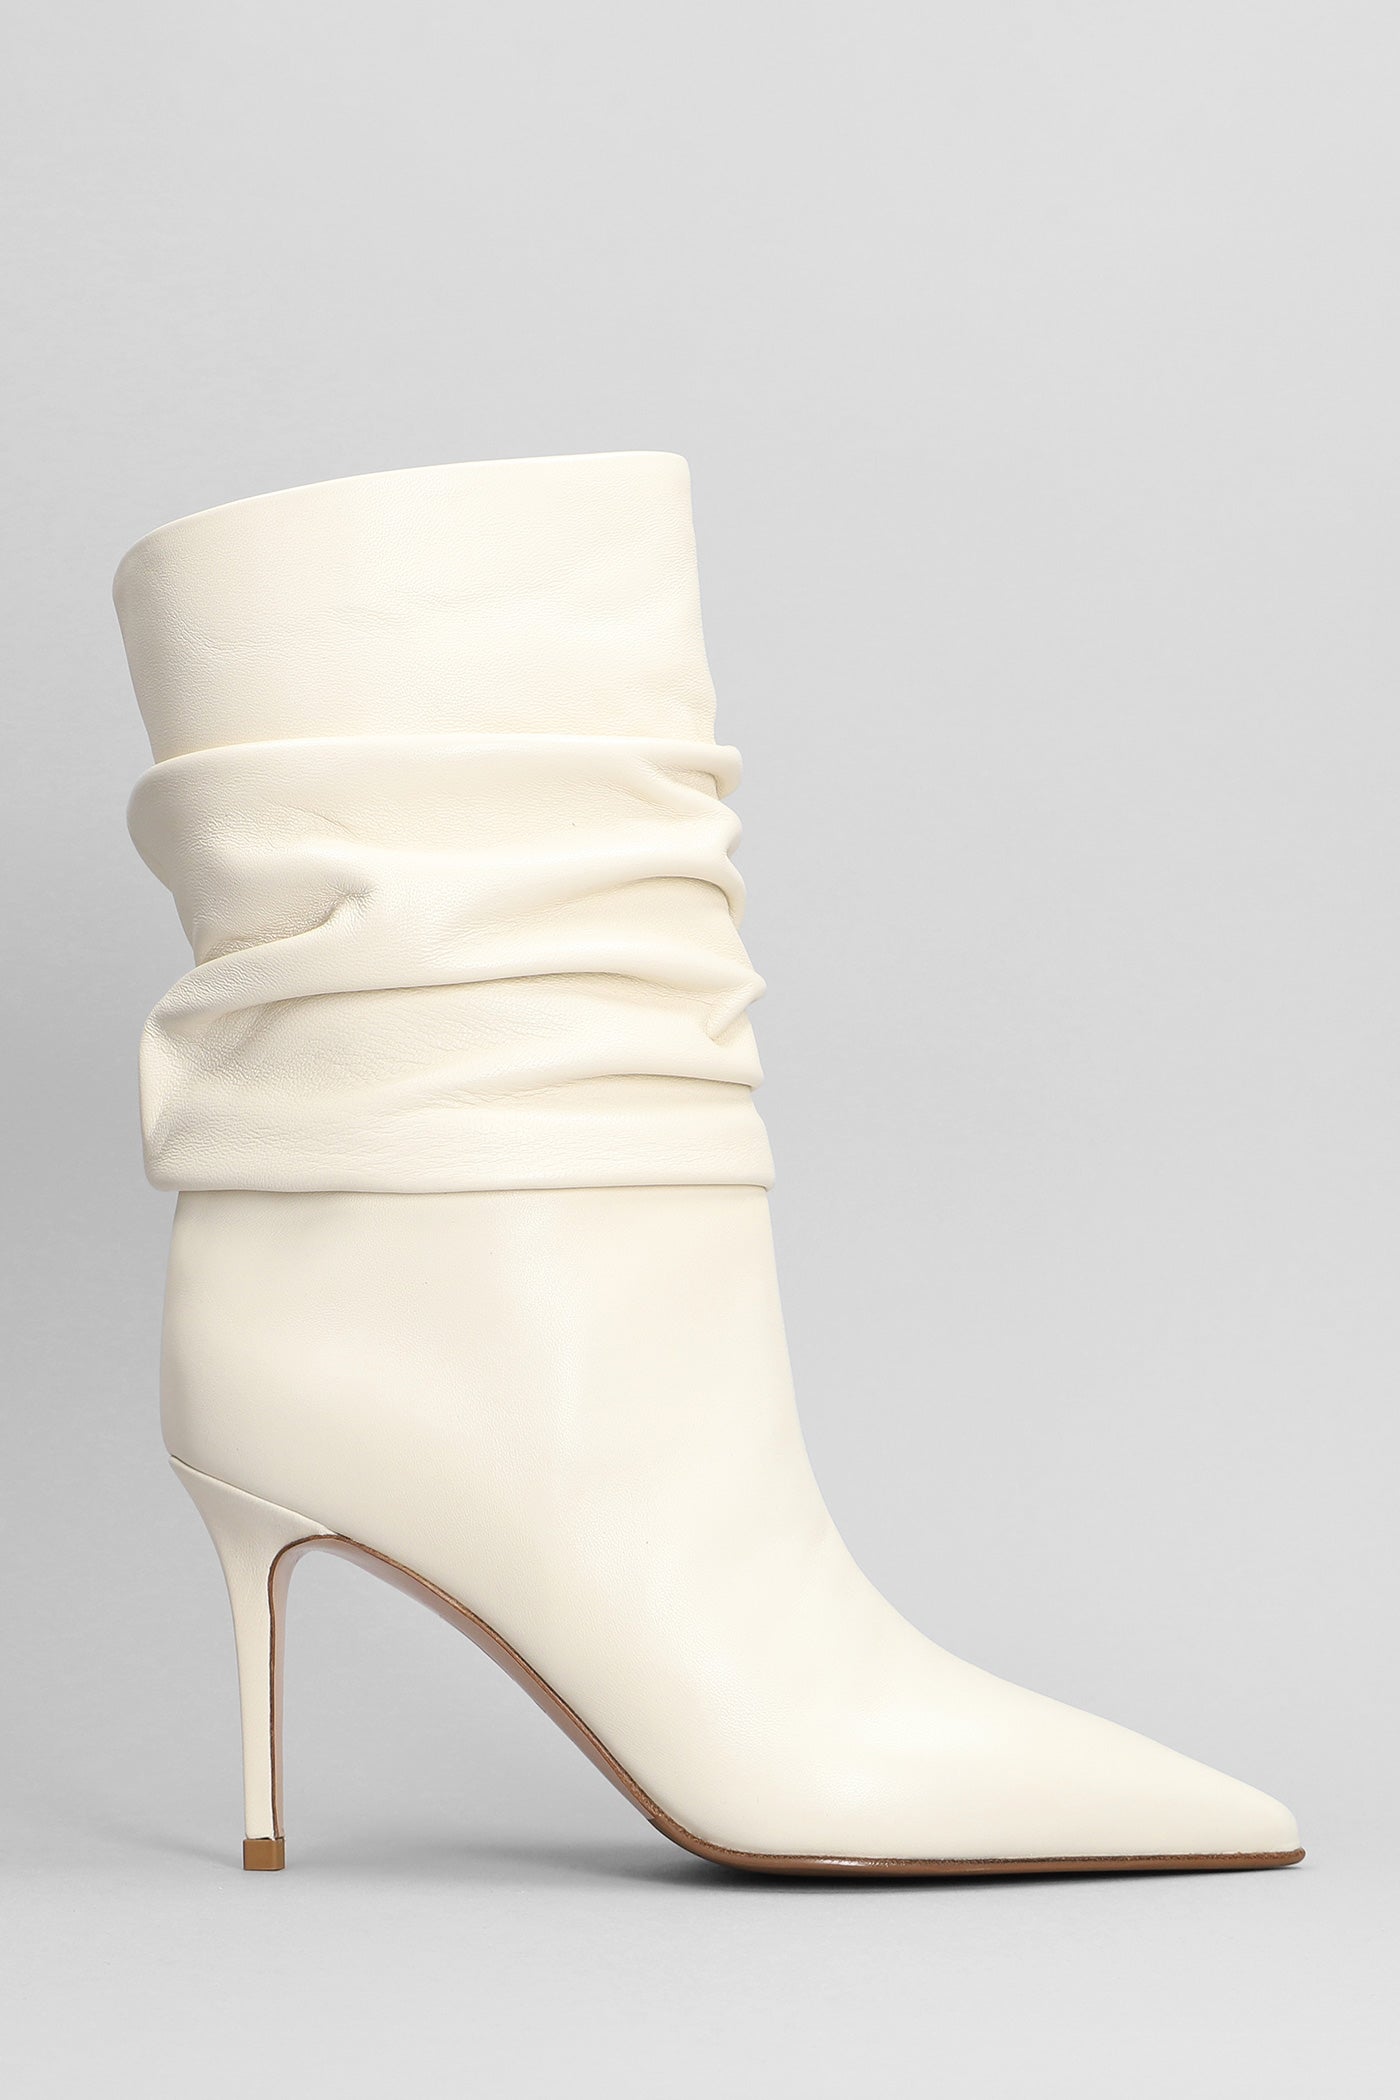 Le Silla - Eva 90 High heels Ankle boots in beige leather